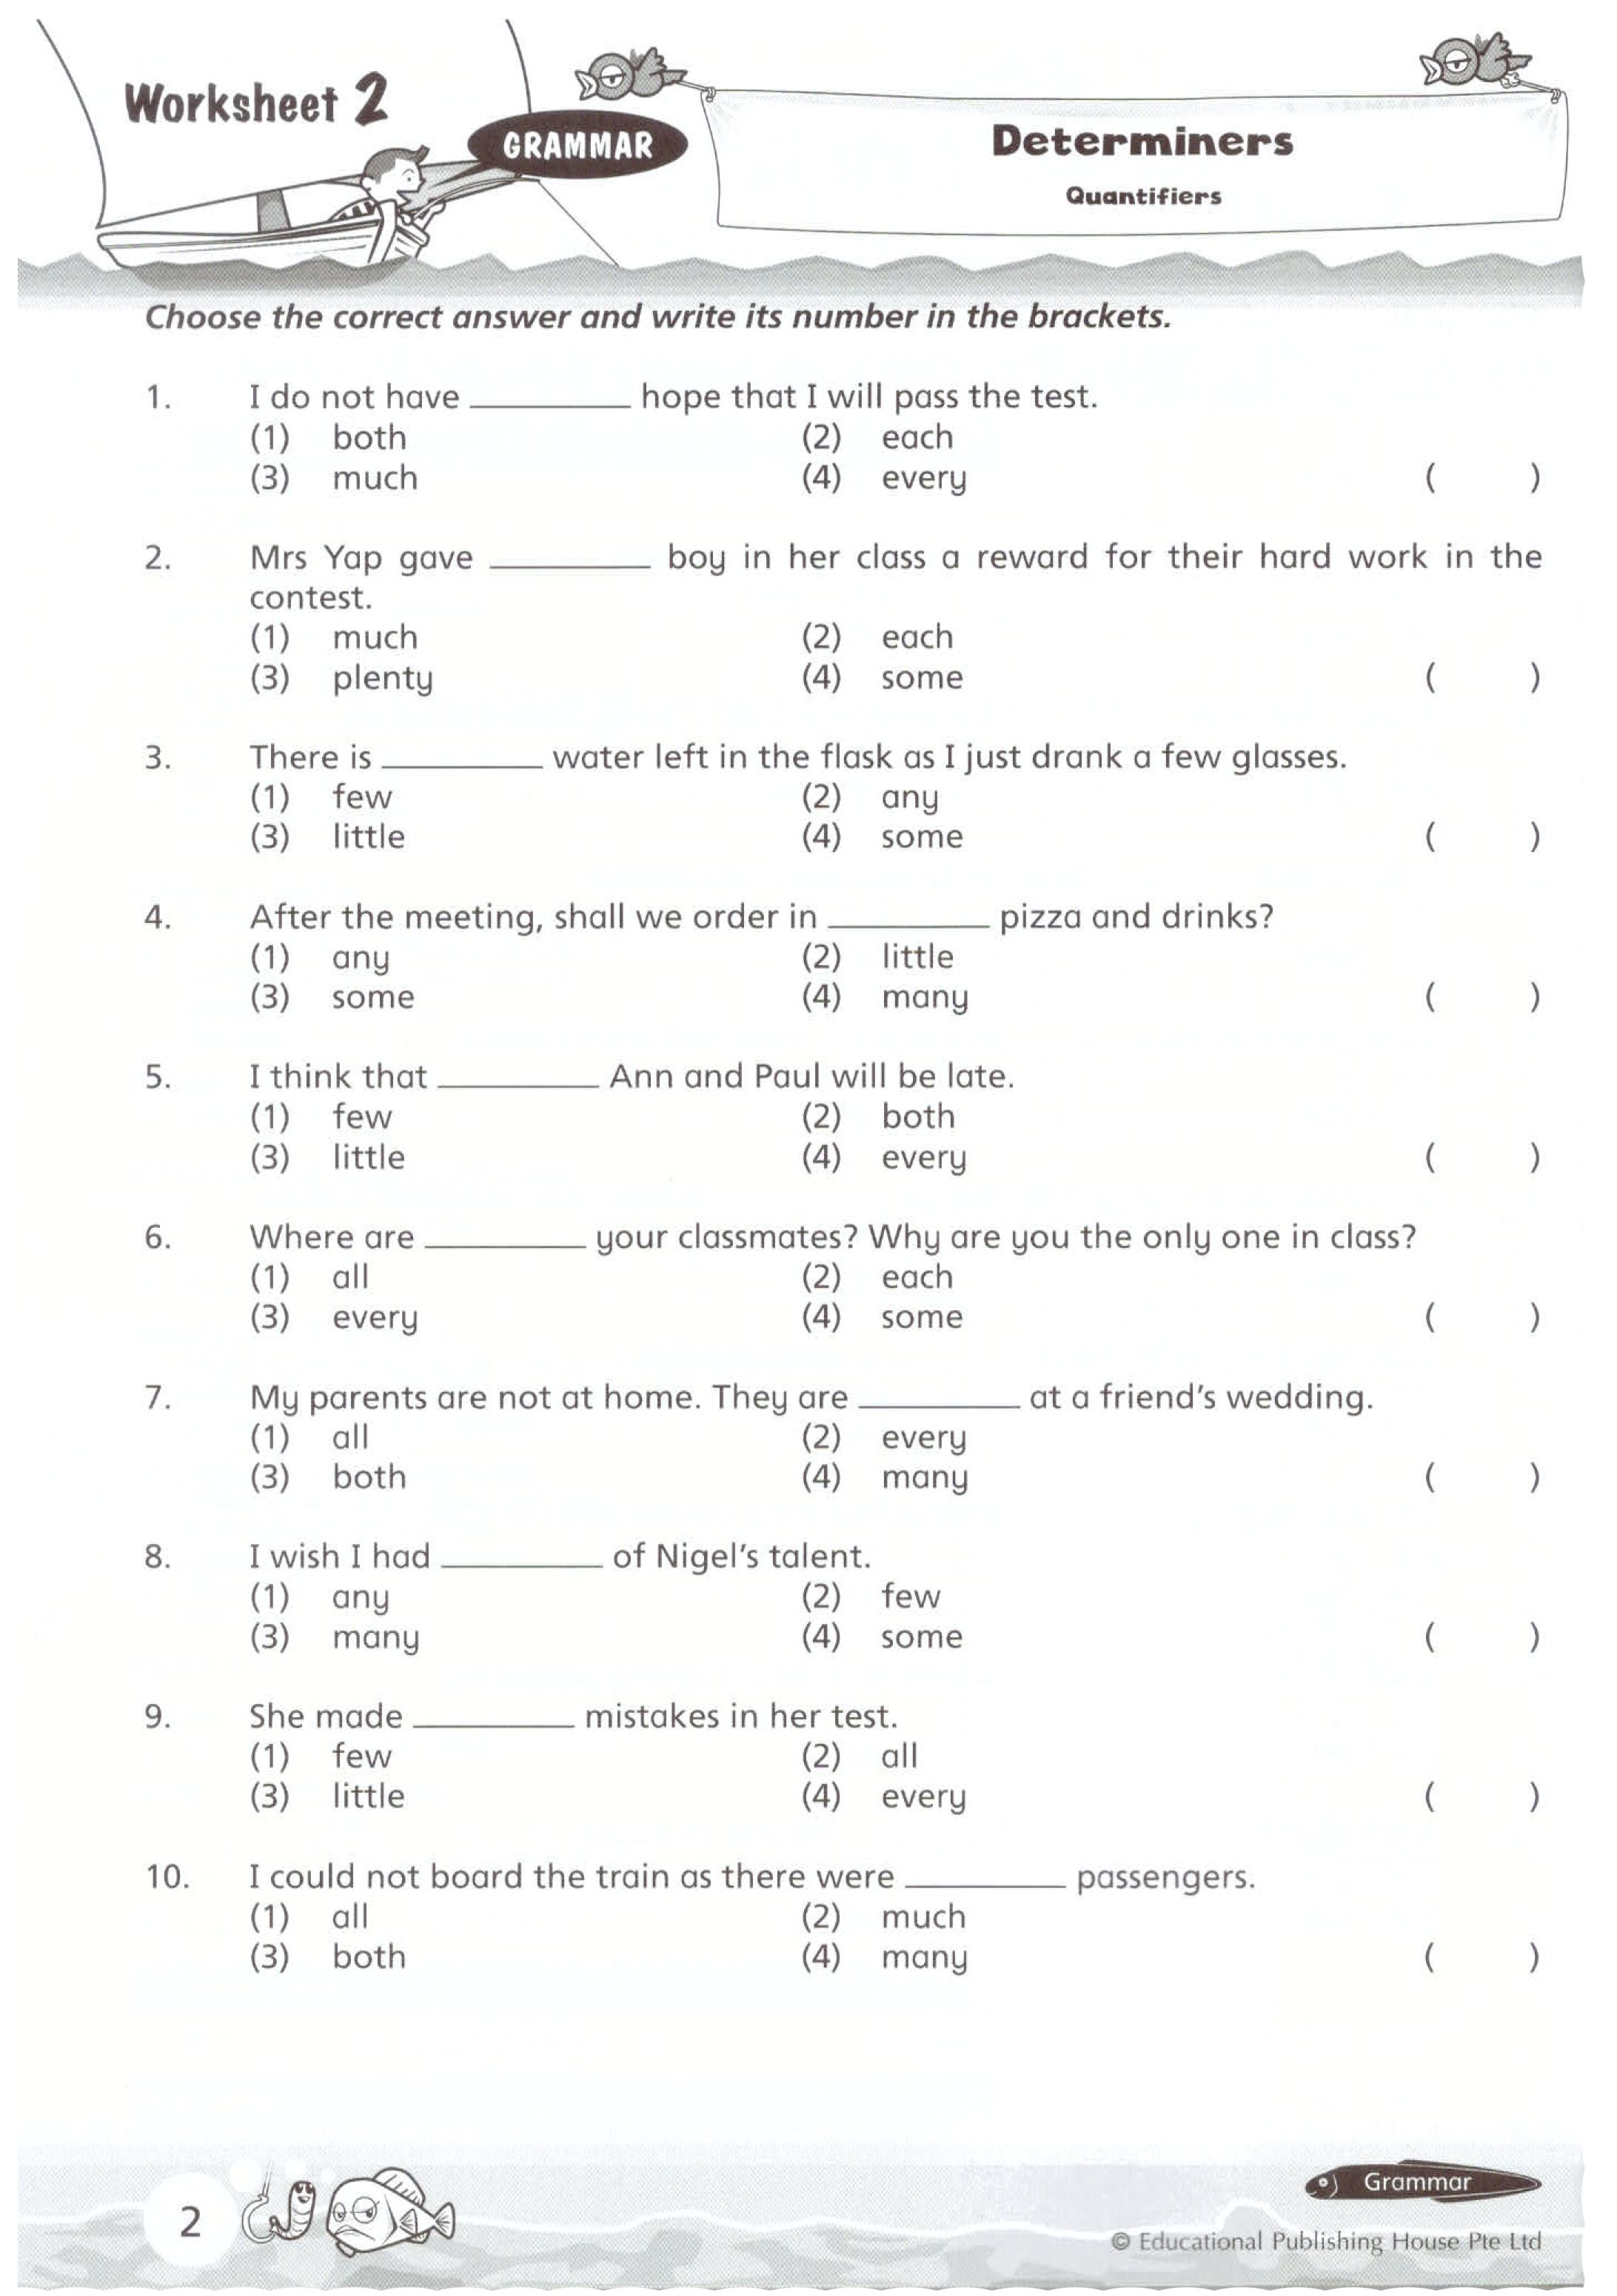 primary-3-english-worksheets-grade-3-grammar-worksheets-pdf-db-excelcom-catrionaxyhuff77c